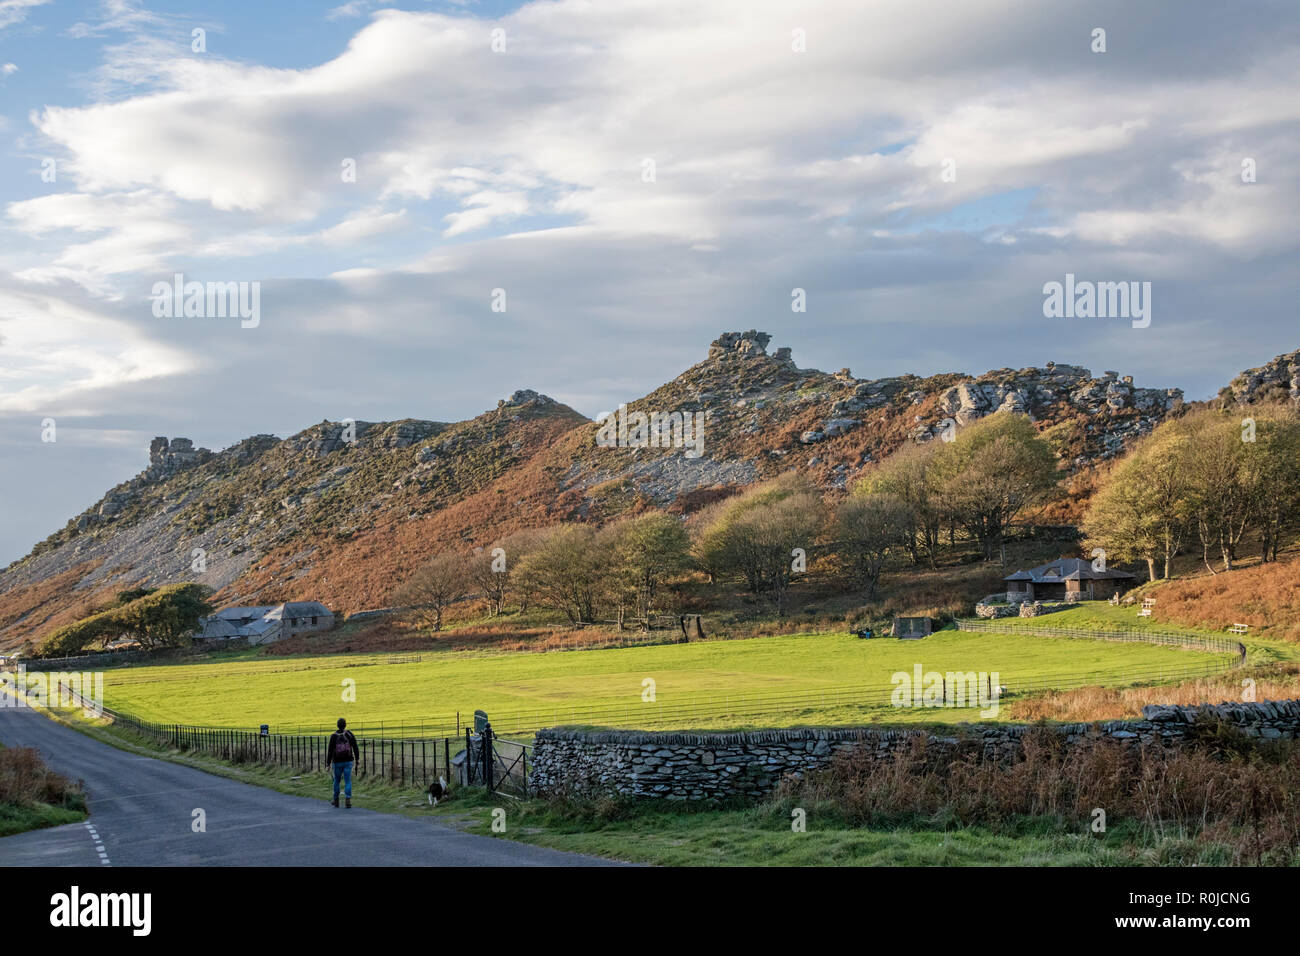 Valley of Rocks, Devon, Angleterre, Royaume-Uni Banque D'Images